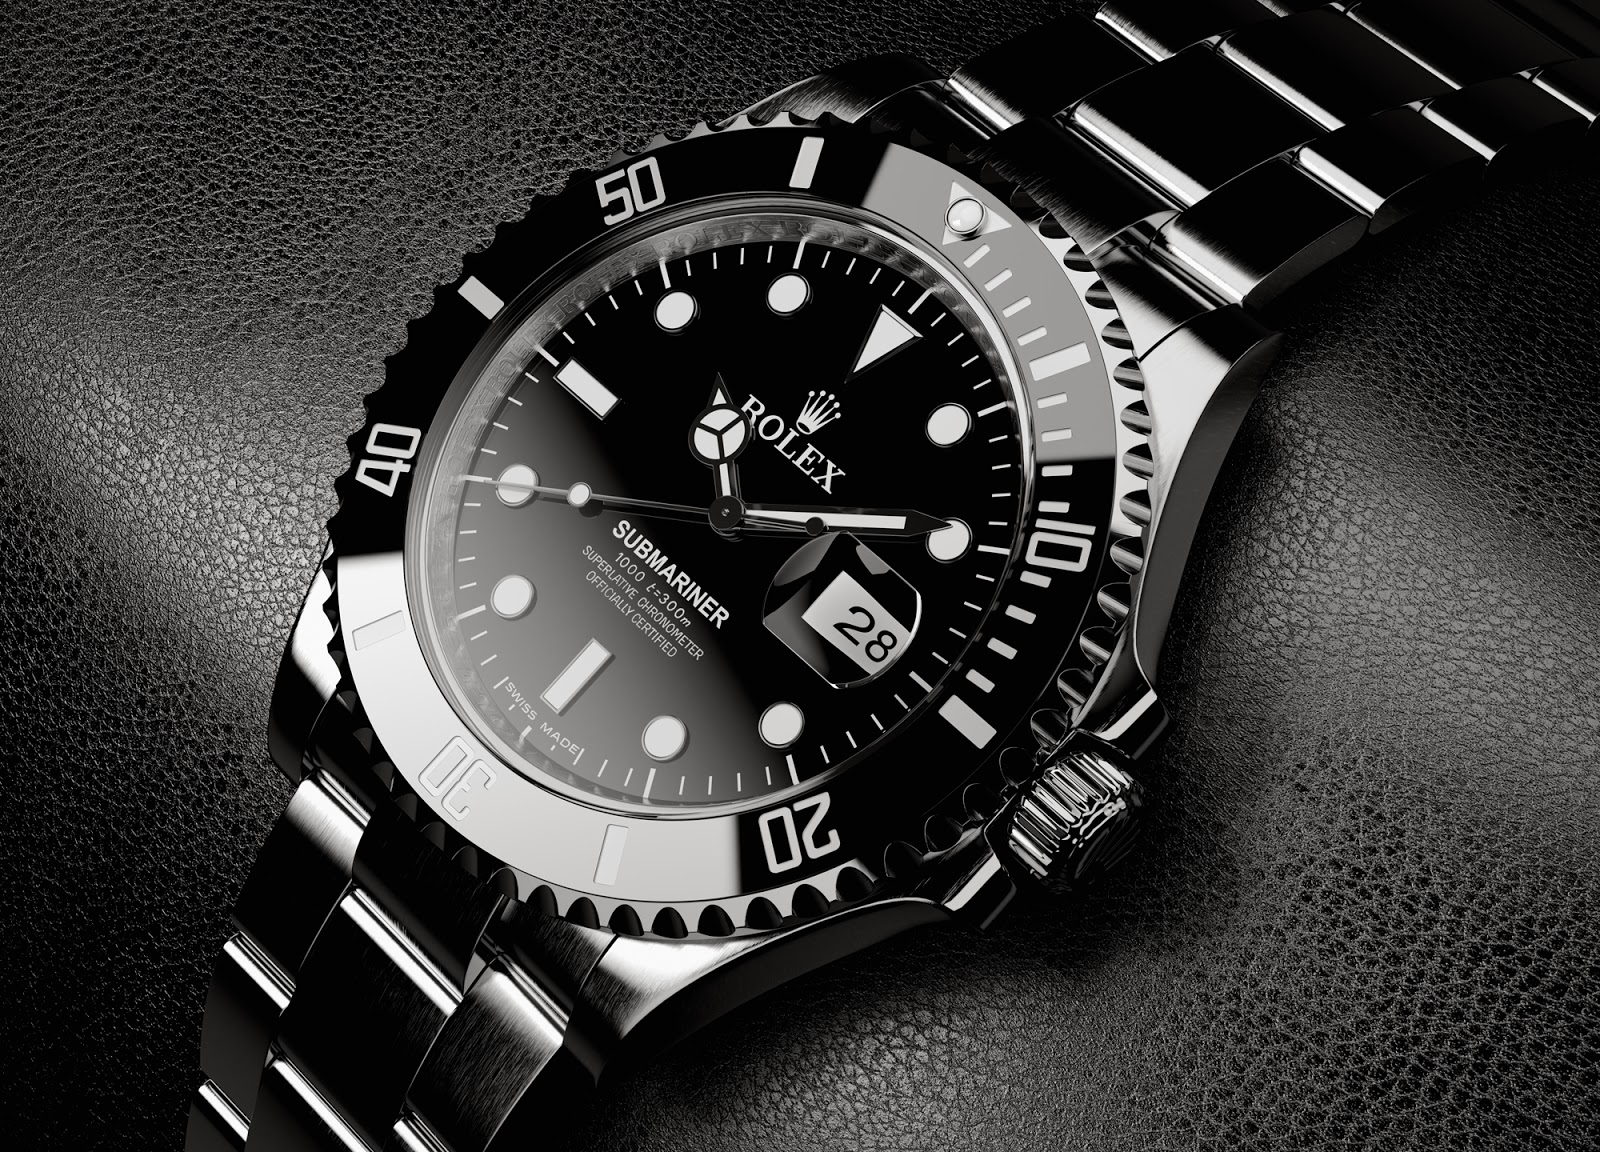 newest stylish watches for men and women too. Vintage Rolex watches ...